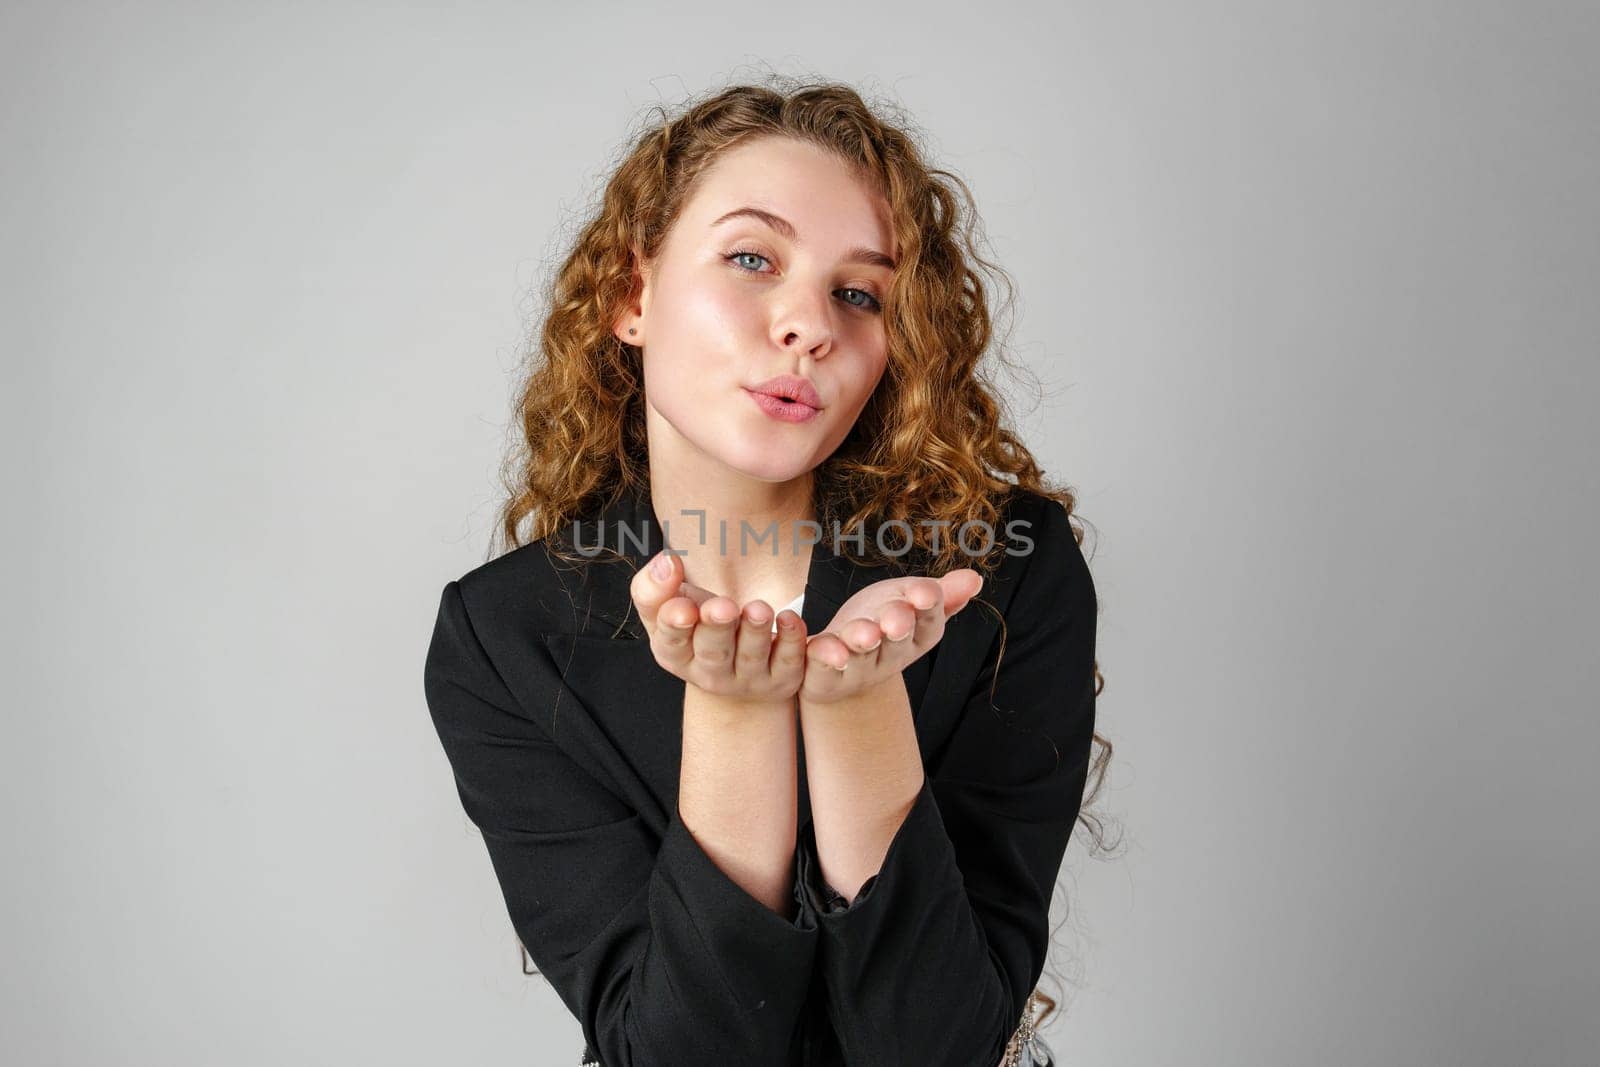 Young Woman Blowing a Kiss Towards the Camera in a Studio Setting by Fabrikasimf